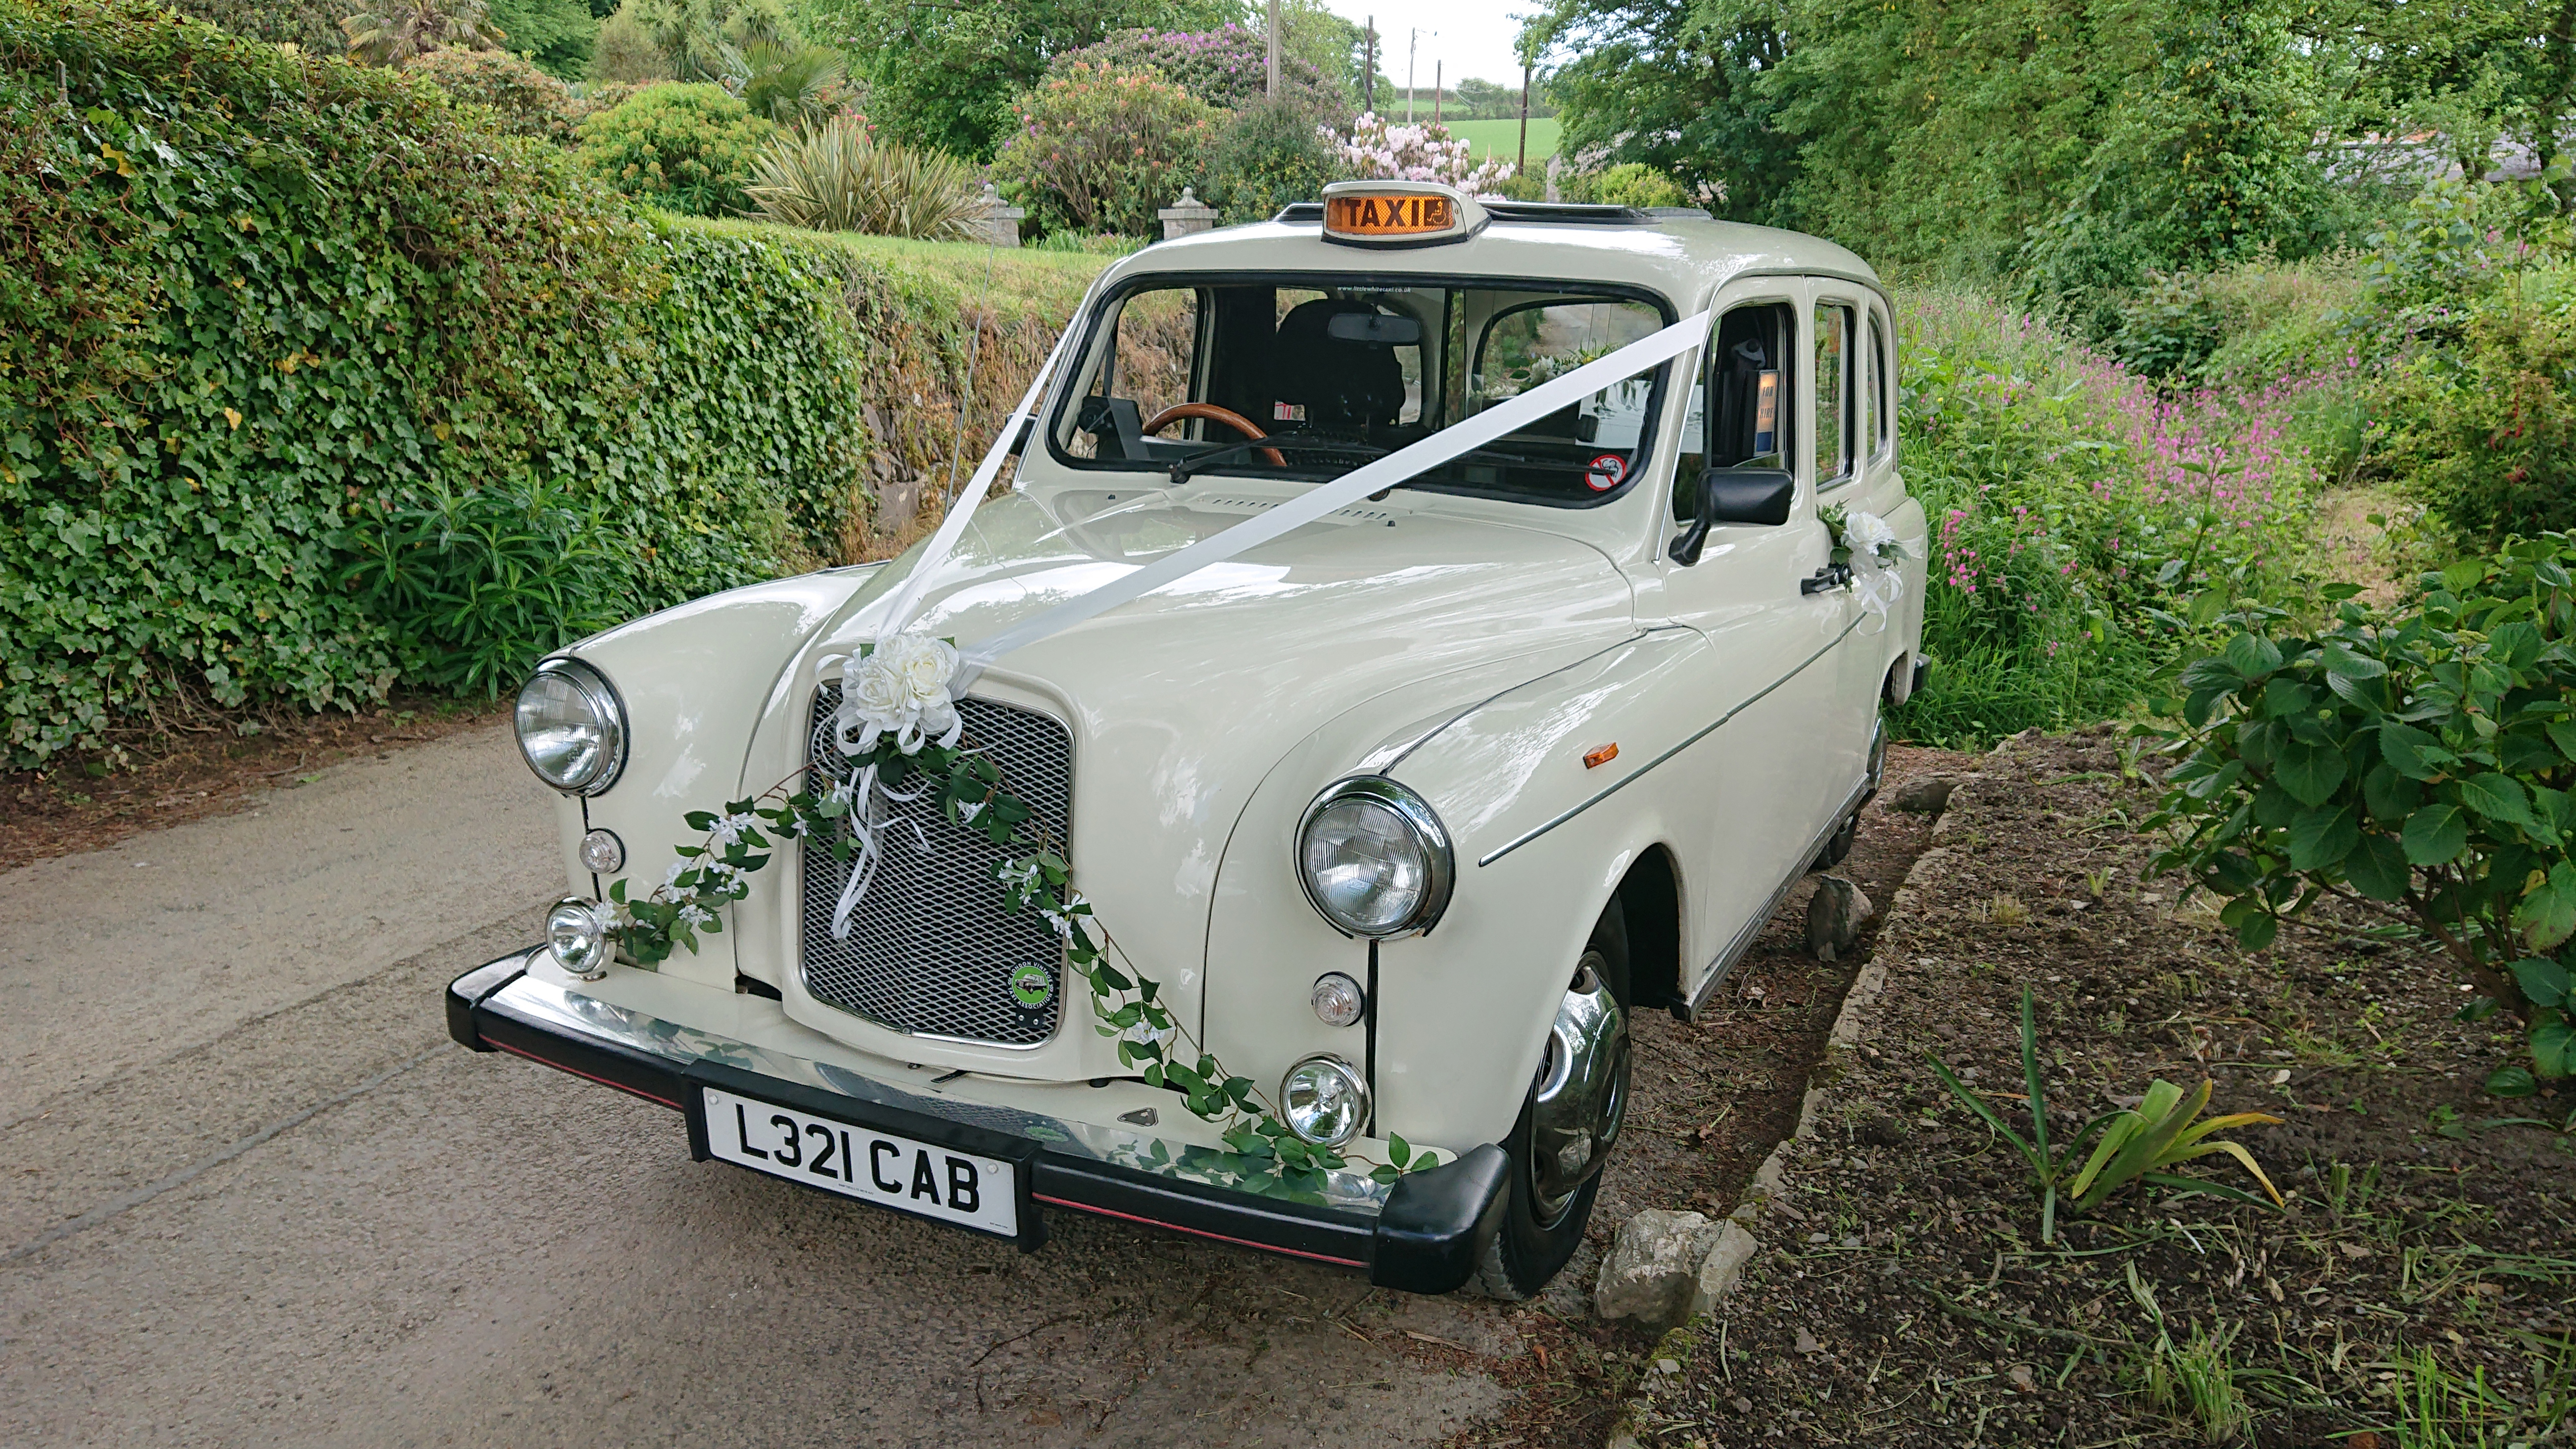 Classic 5-seater Taxi Cab in Ivory decorated with white ribbons across its bonnet and a garland of green leaves across the chromed front bumper. The Taxi Sign on top of the vehicle is illuminated.